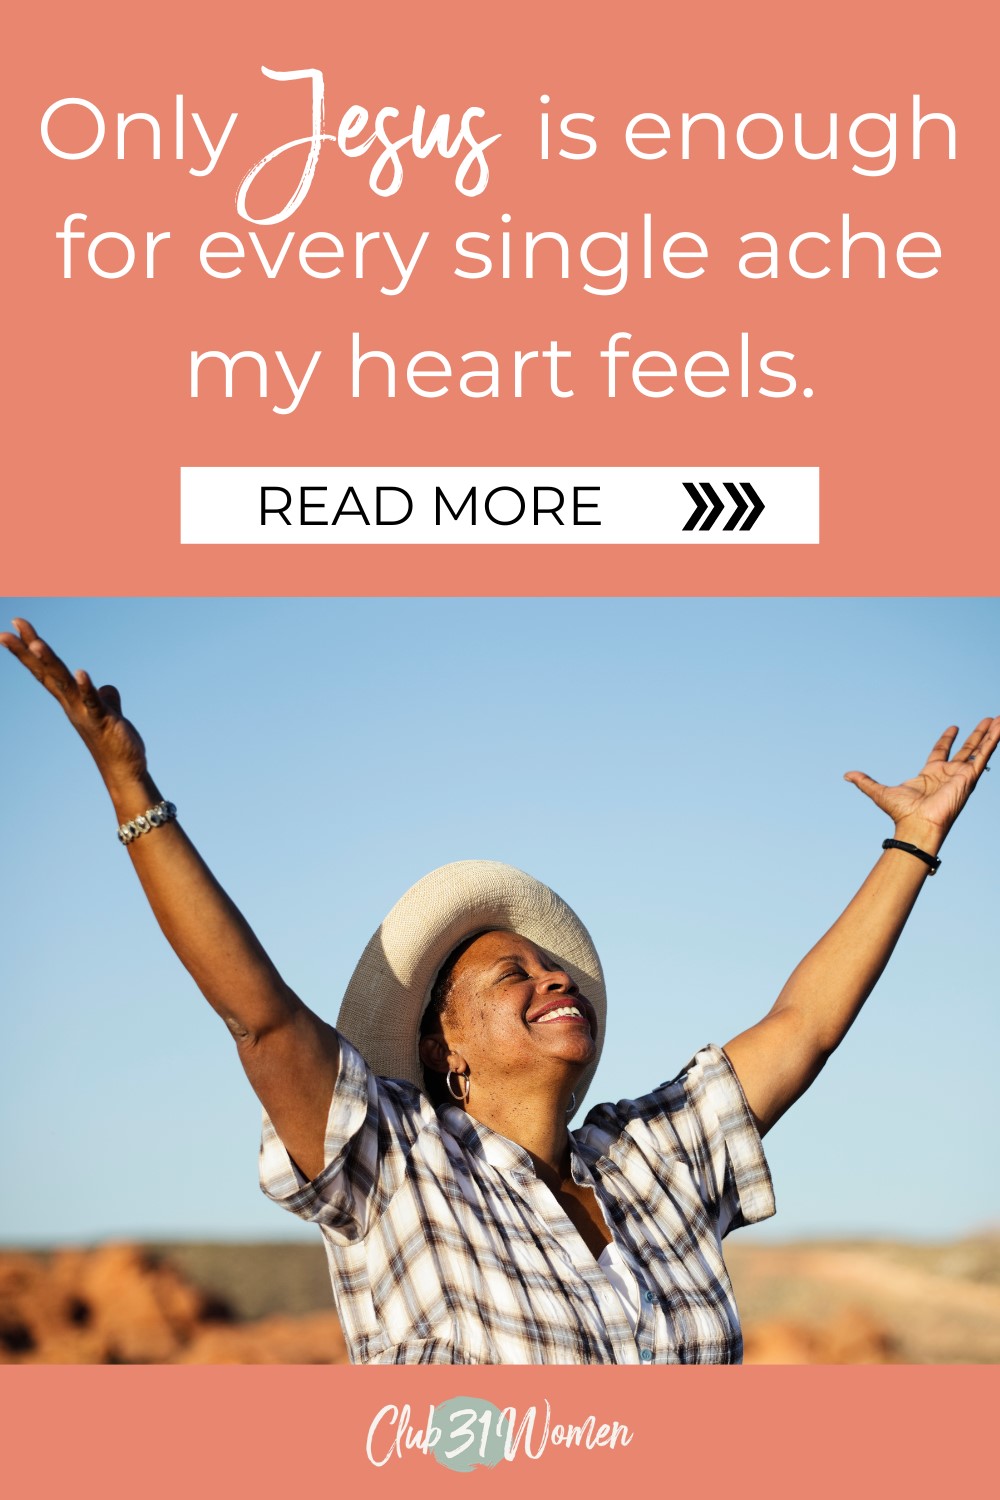 Is Your Heart Crying Out For The Love Of Jesus? via @Club31Women